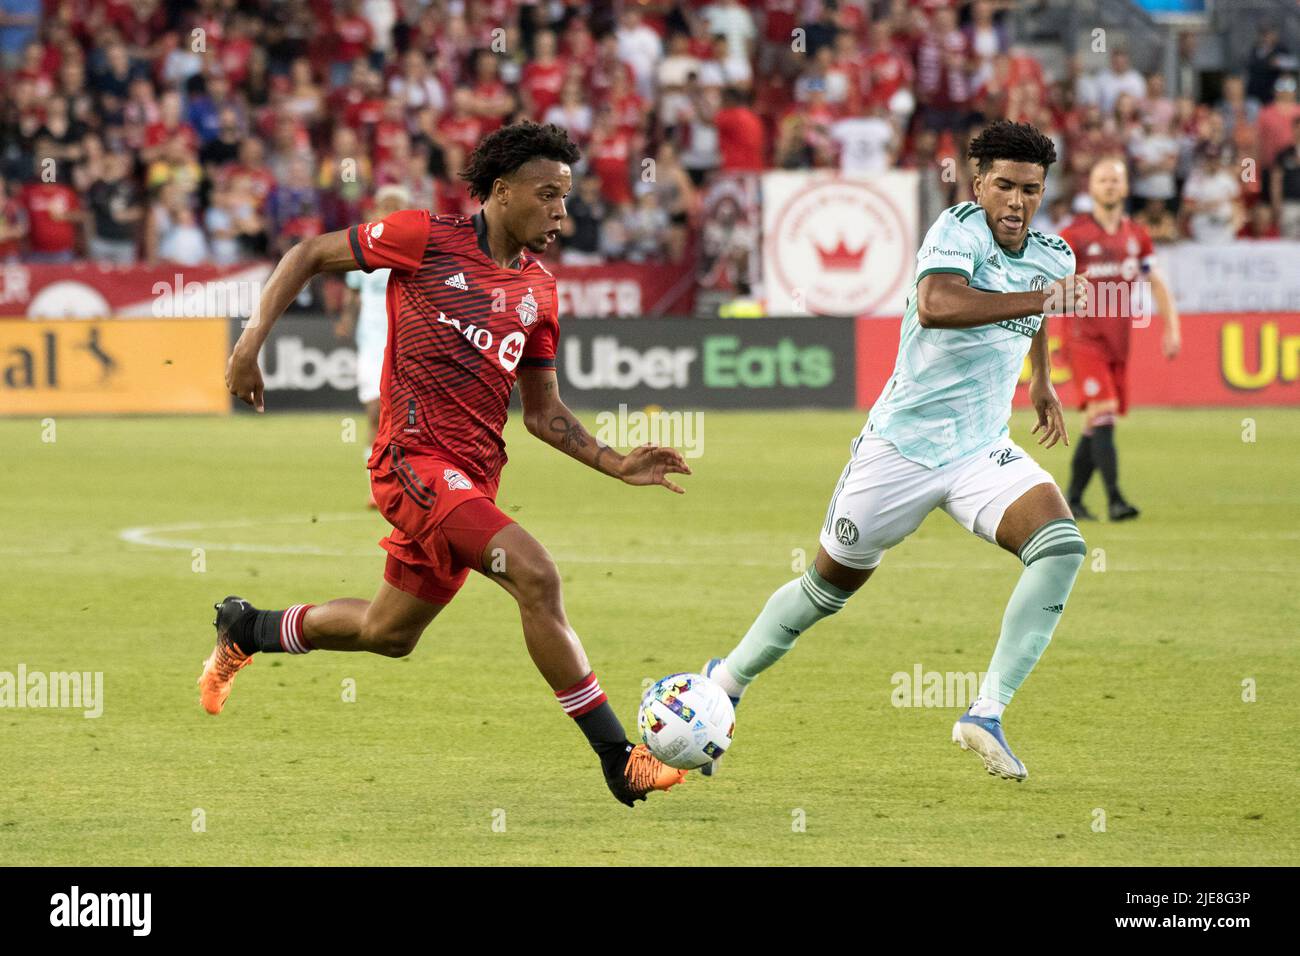 Toronto, Canada. 25th June, 2022. Kosi Thompson (47) and Caleb Wiley (26) in action during the MLS game between Toronto FC and Atlanta United FC at BMO Field. The game ended 2-1 for Toronto FC. (Photo by Angel Marchini/SOPA Images/Sipa USA) Credit: Sipa USA/Alamy Live News Stock Photo